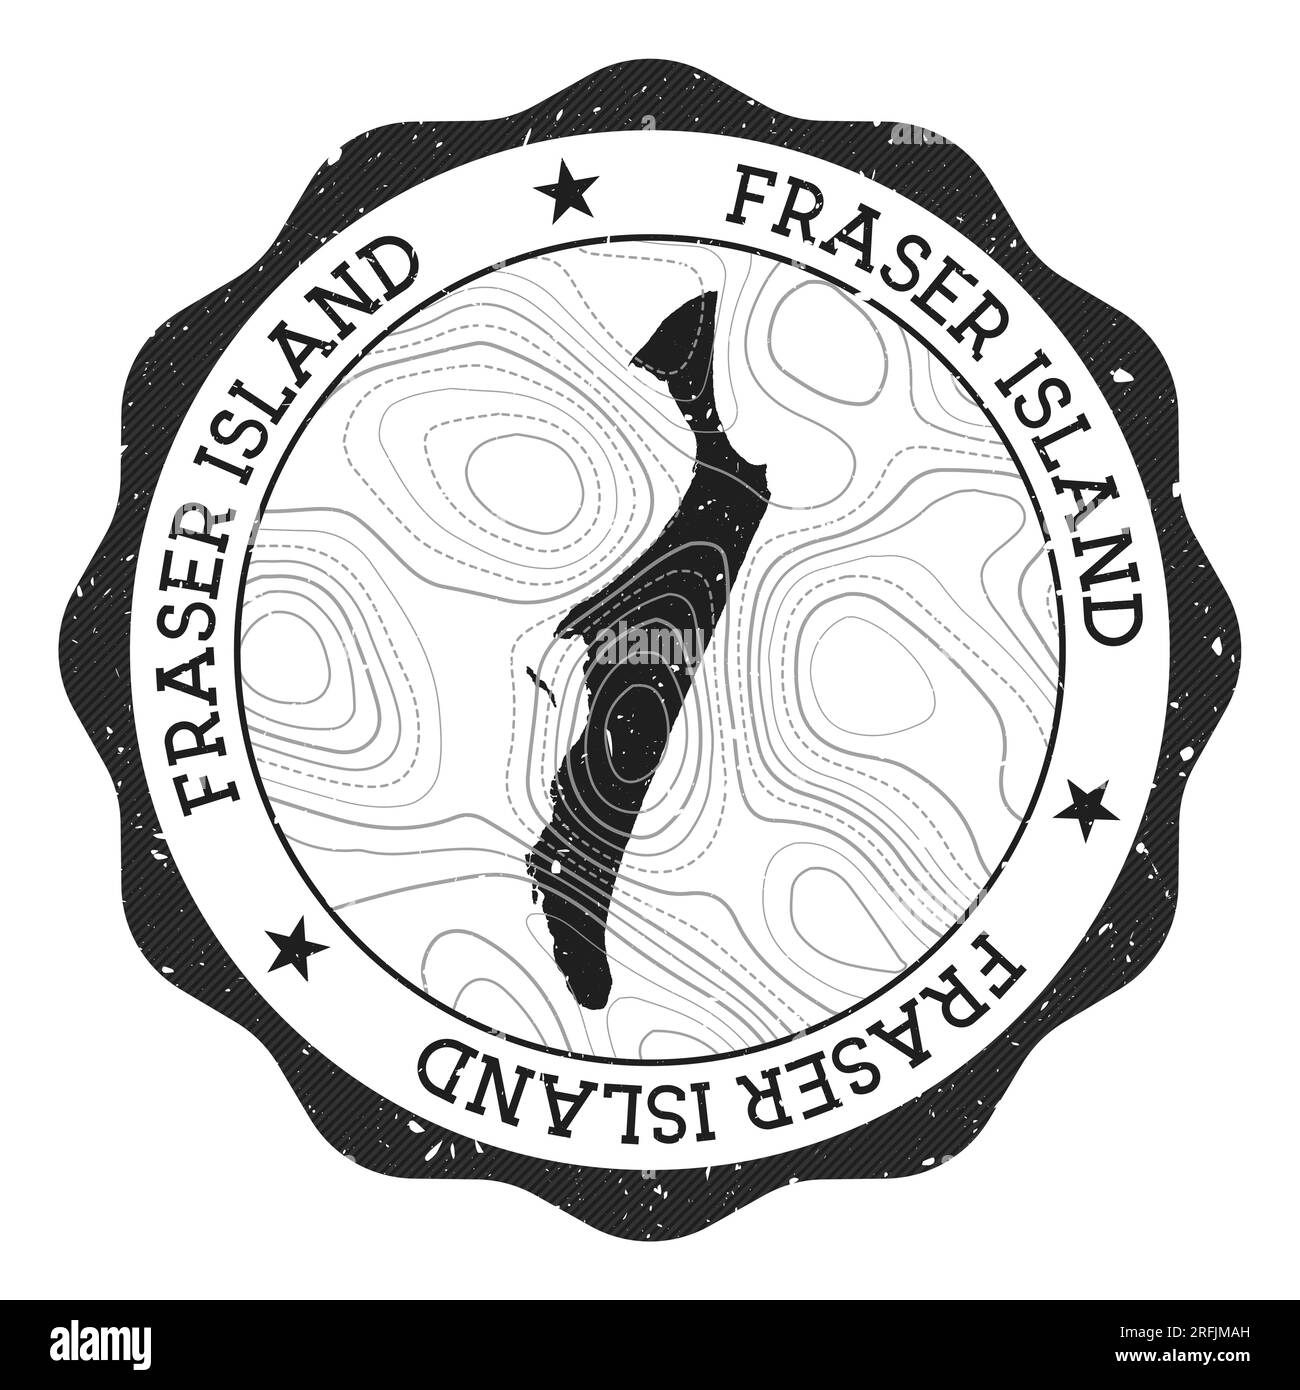 Fraser Island outdoor stamp. Round sticker with map with topographic isolines. Vector illustration. Can be used as insignia, logotype, label, sticker Stock Vector